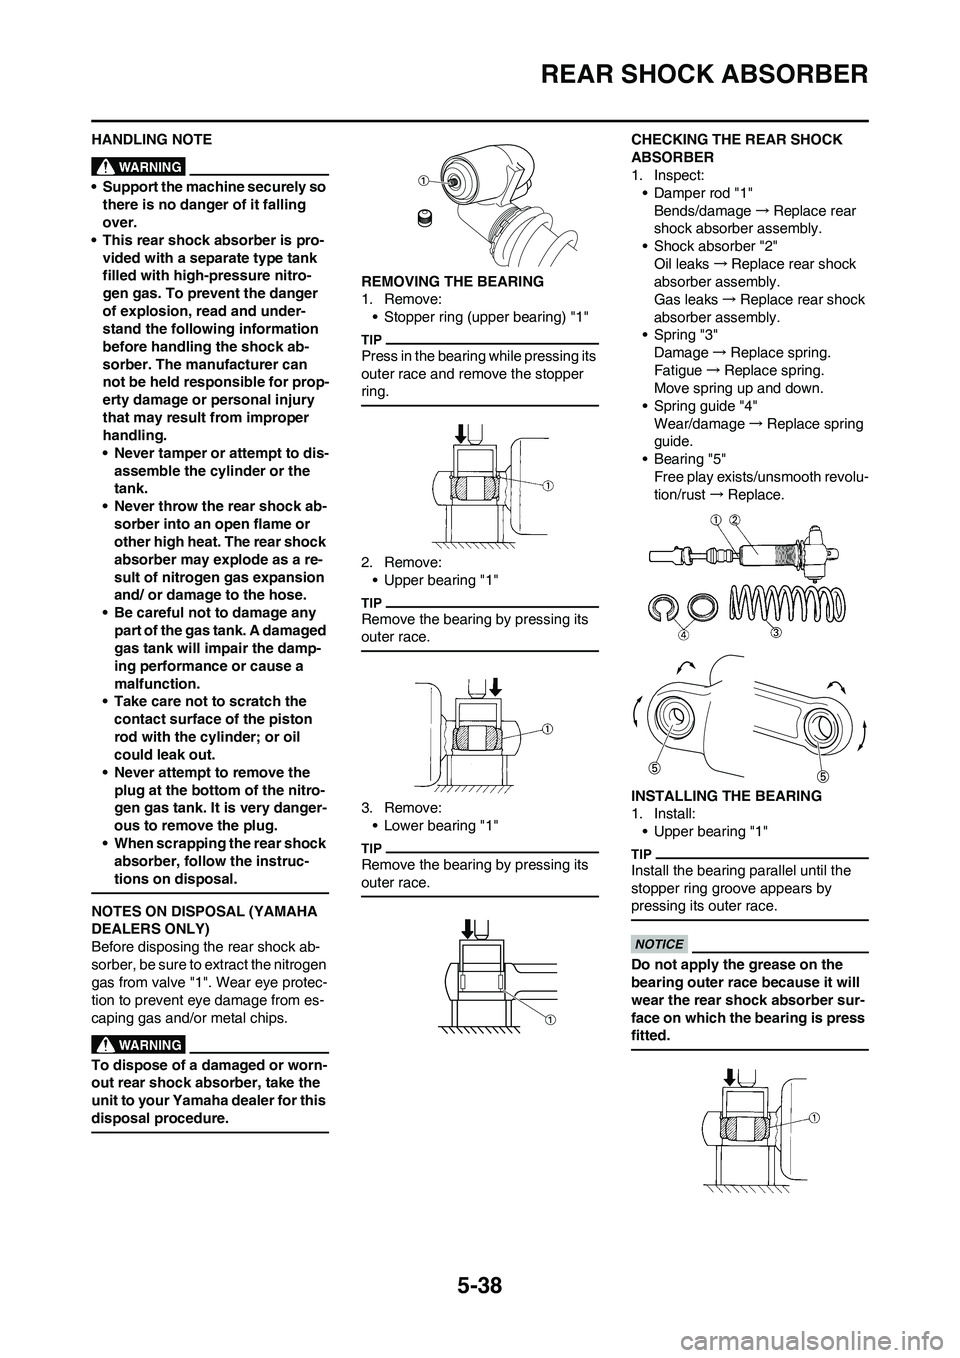 YAMAHA YZ450F 2010  Owners Manual 5-38
REAR SHOCK ABSORBER
HANDLING NOTE
• Support the machine securely so 
there is no danger of it falling 
over.
• This rear shock absorber is pro-
vided with a separate type tank 
filled with hi